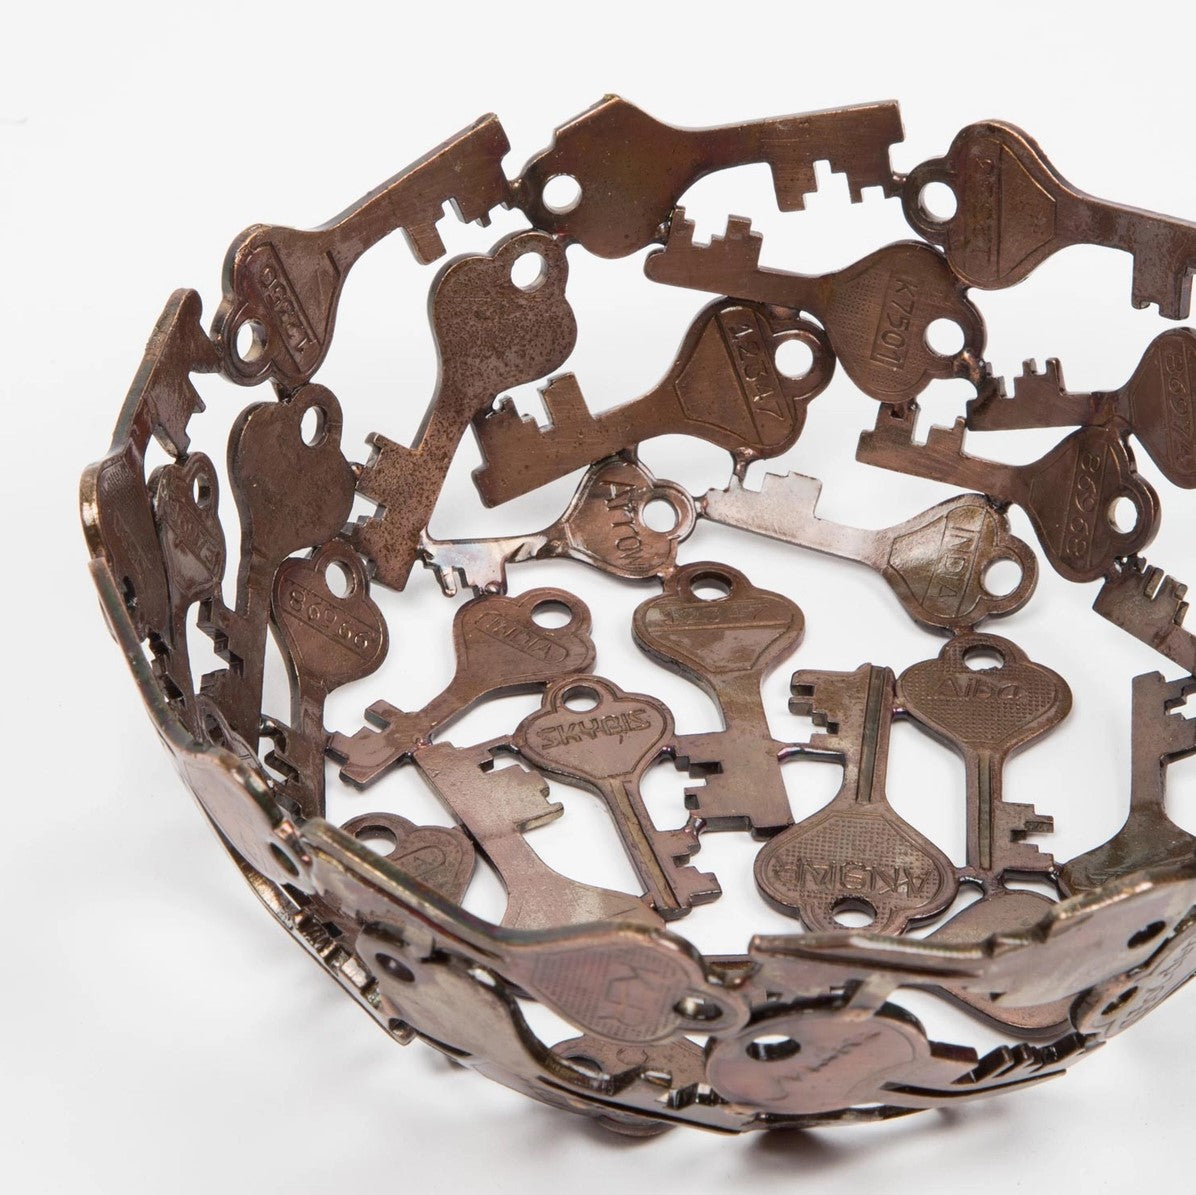 Handcrafted Antiqued Copper Colored Iron Recycled Key Bowl | India Fair Trade